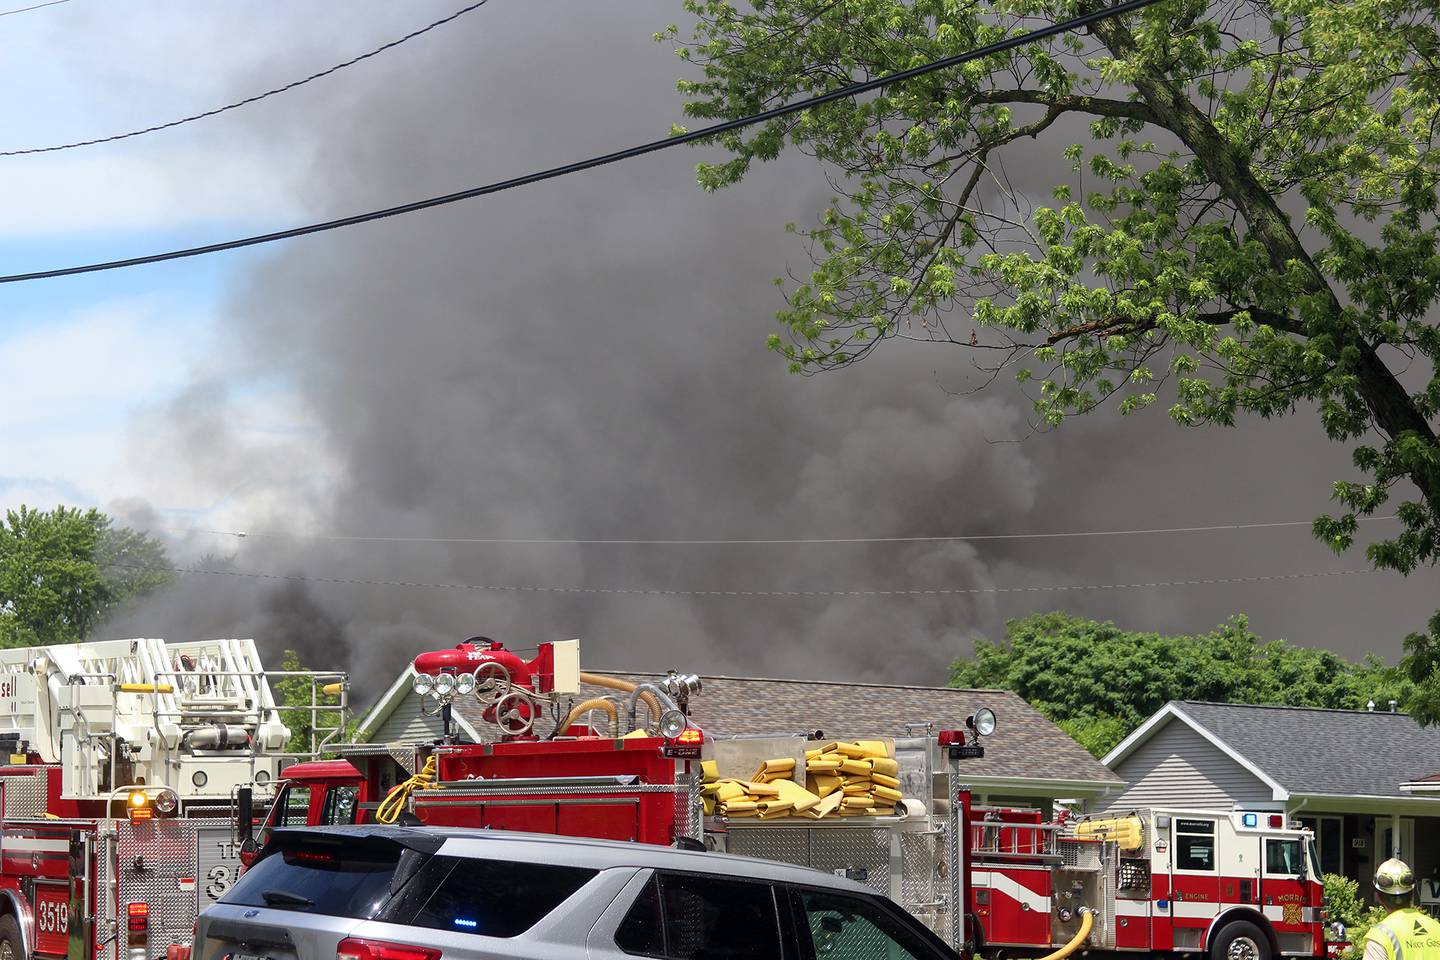 Smoke billows from the fire at 919 E. Benton St. in Morris. The building contains more than 100,000 pounds of lithium batteries and the east side of Morris has been evacuated.